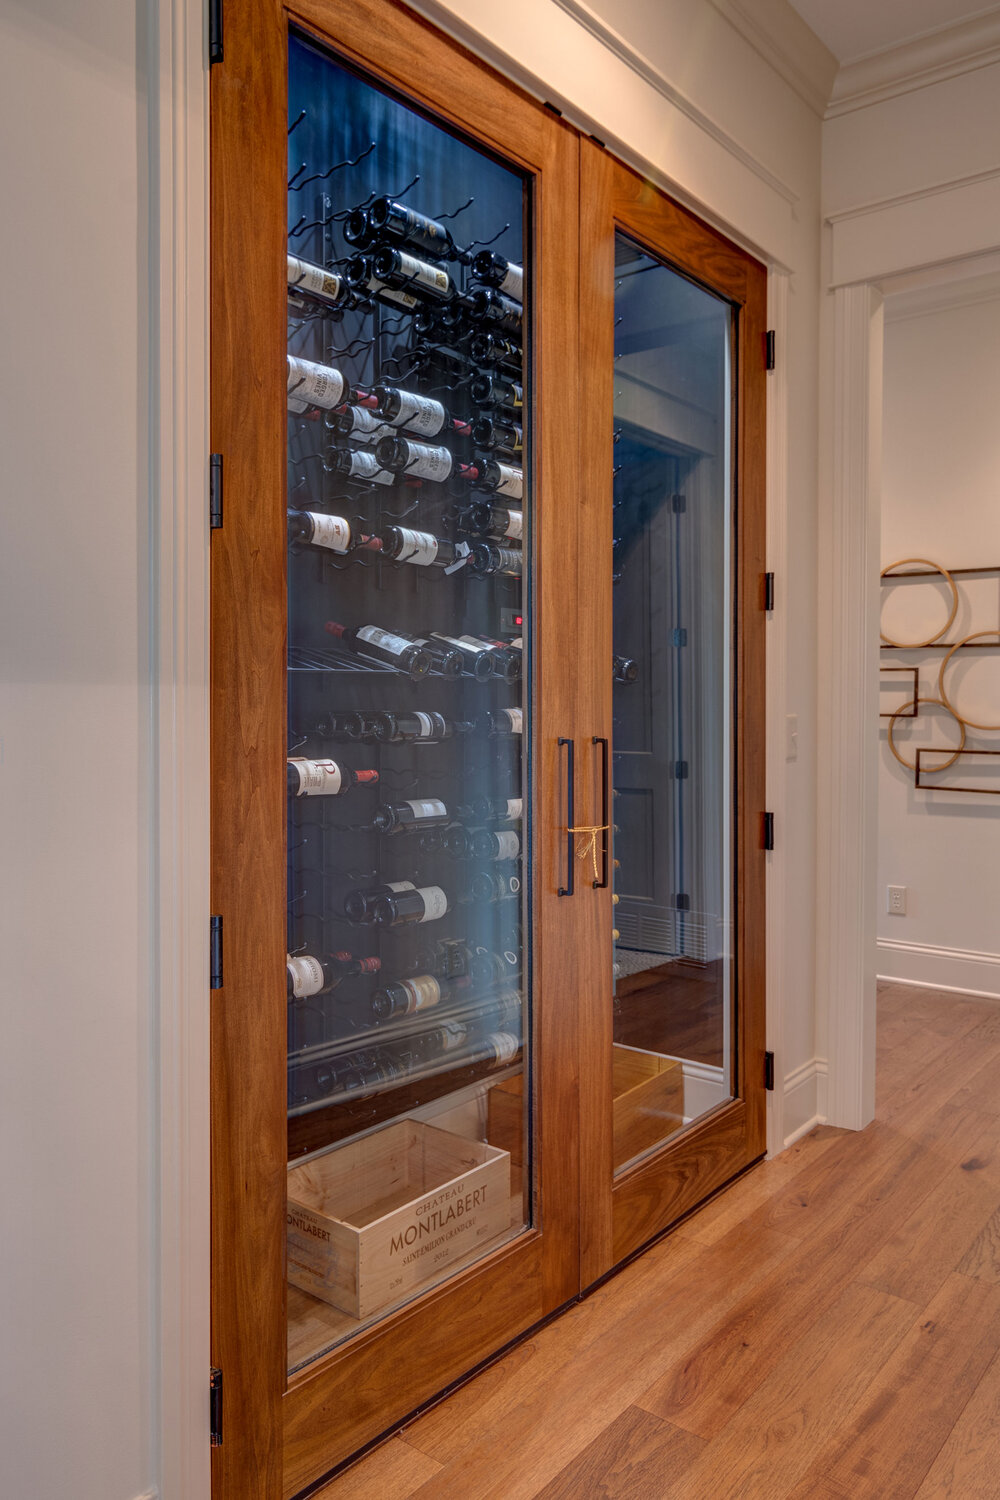 A wine cabinet would be ideal -- as long as it's in the budget.